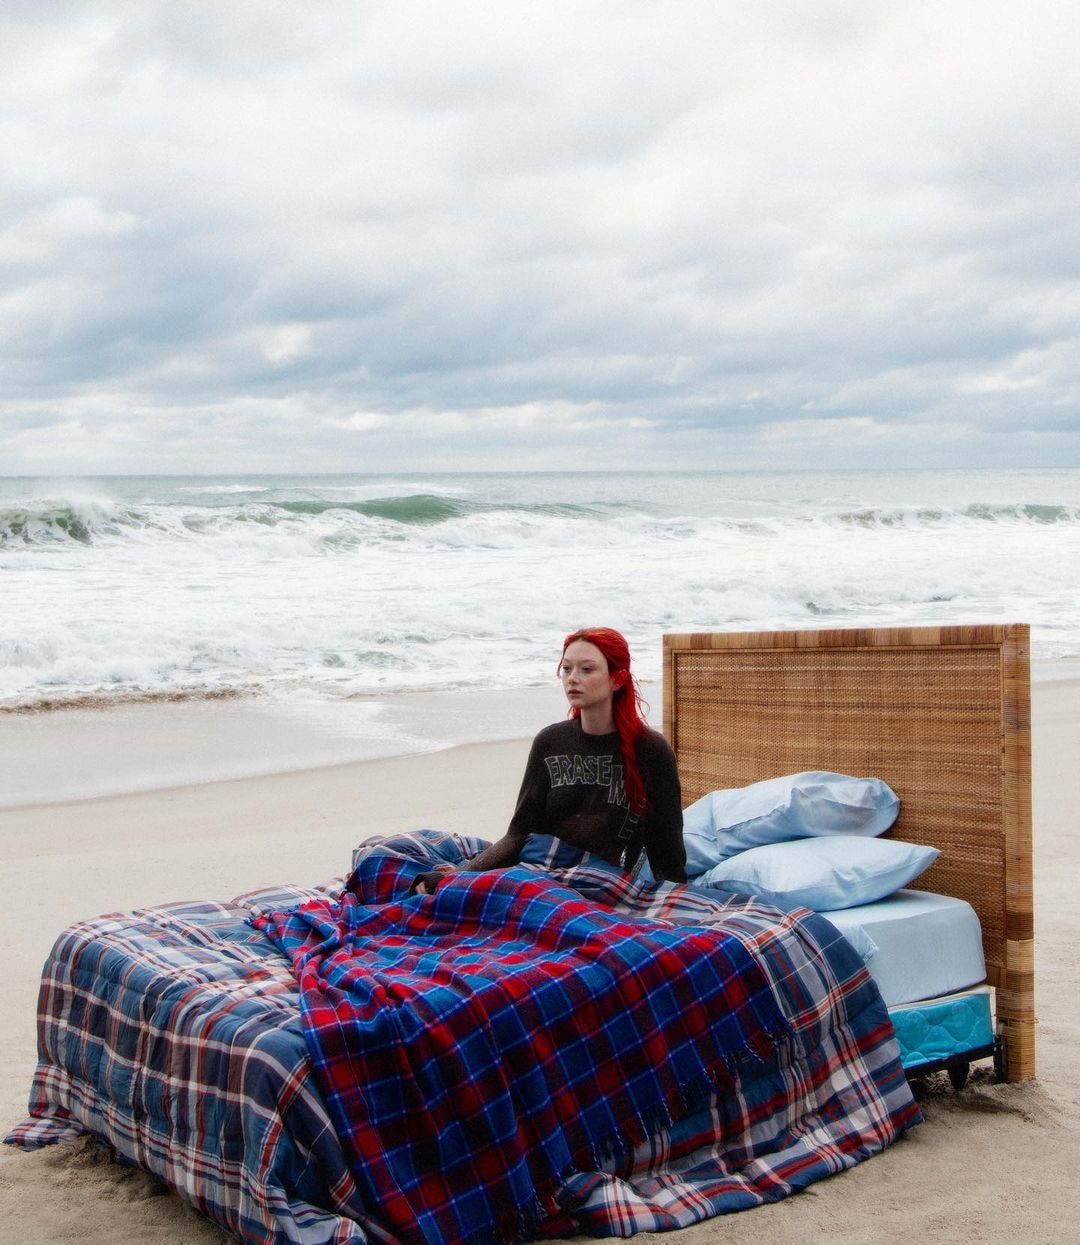 Heaven by Marc Jacobs Eternal Sunshine of the Spotless Mind Campaign Images Release